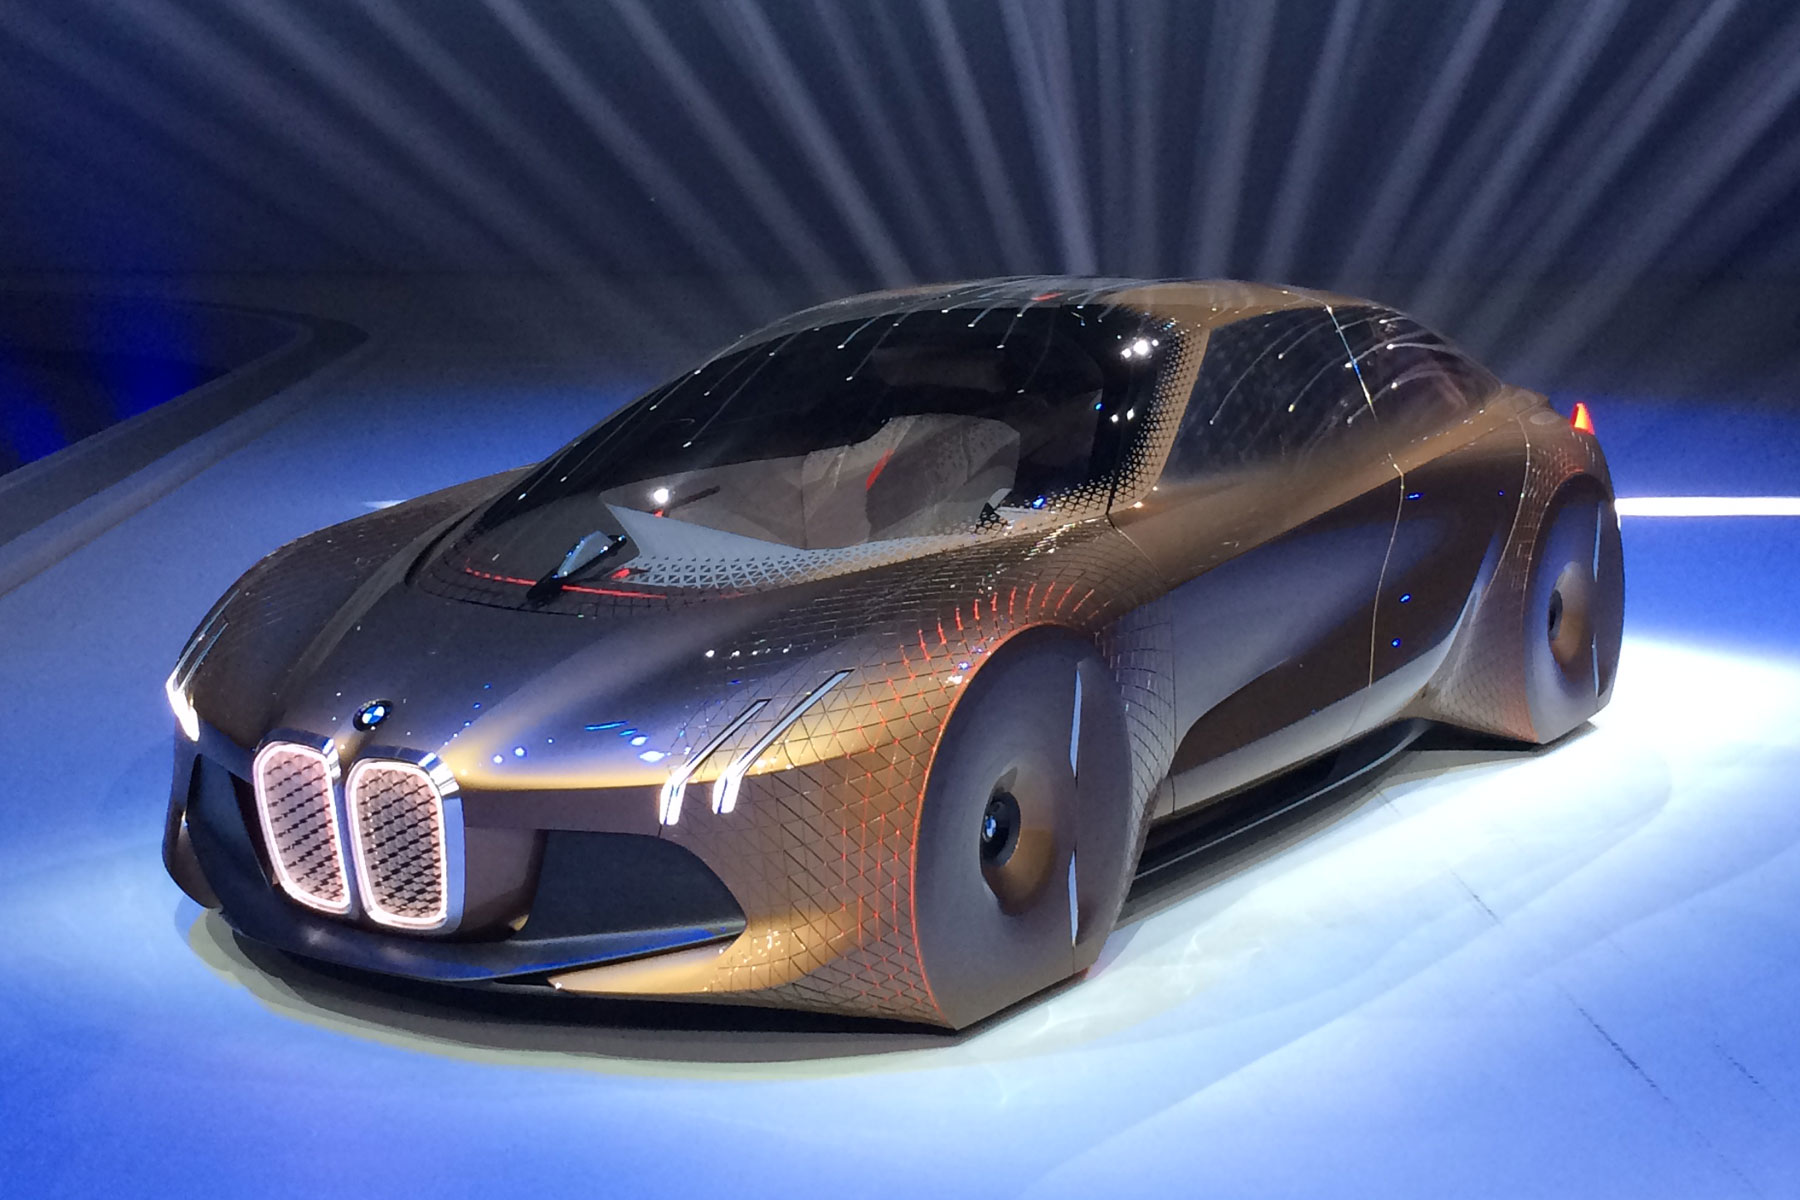  BMW  Vision Next 100 concept  revealed on 100th anniversary 